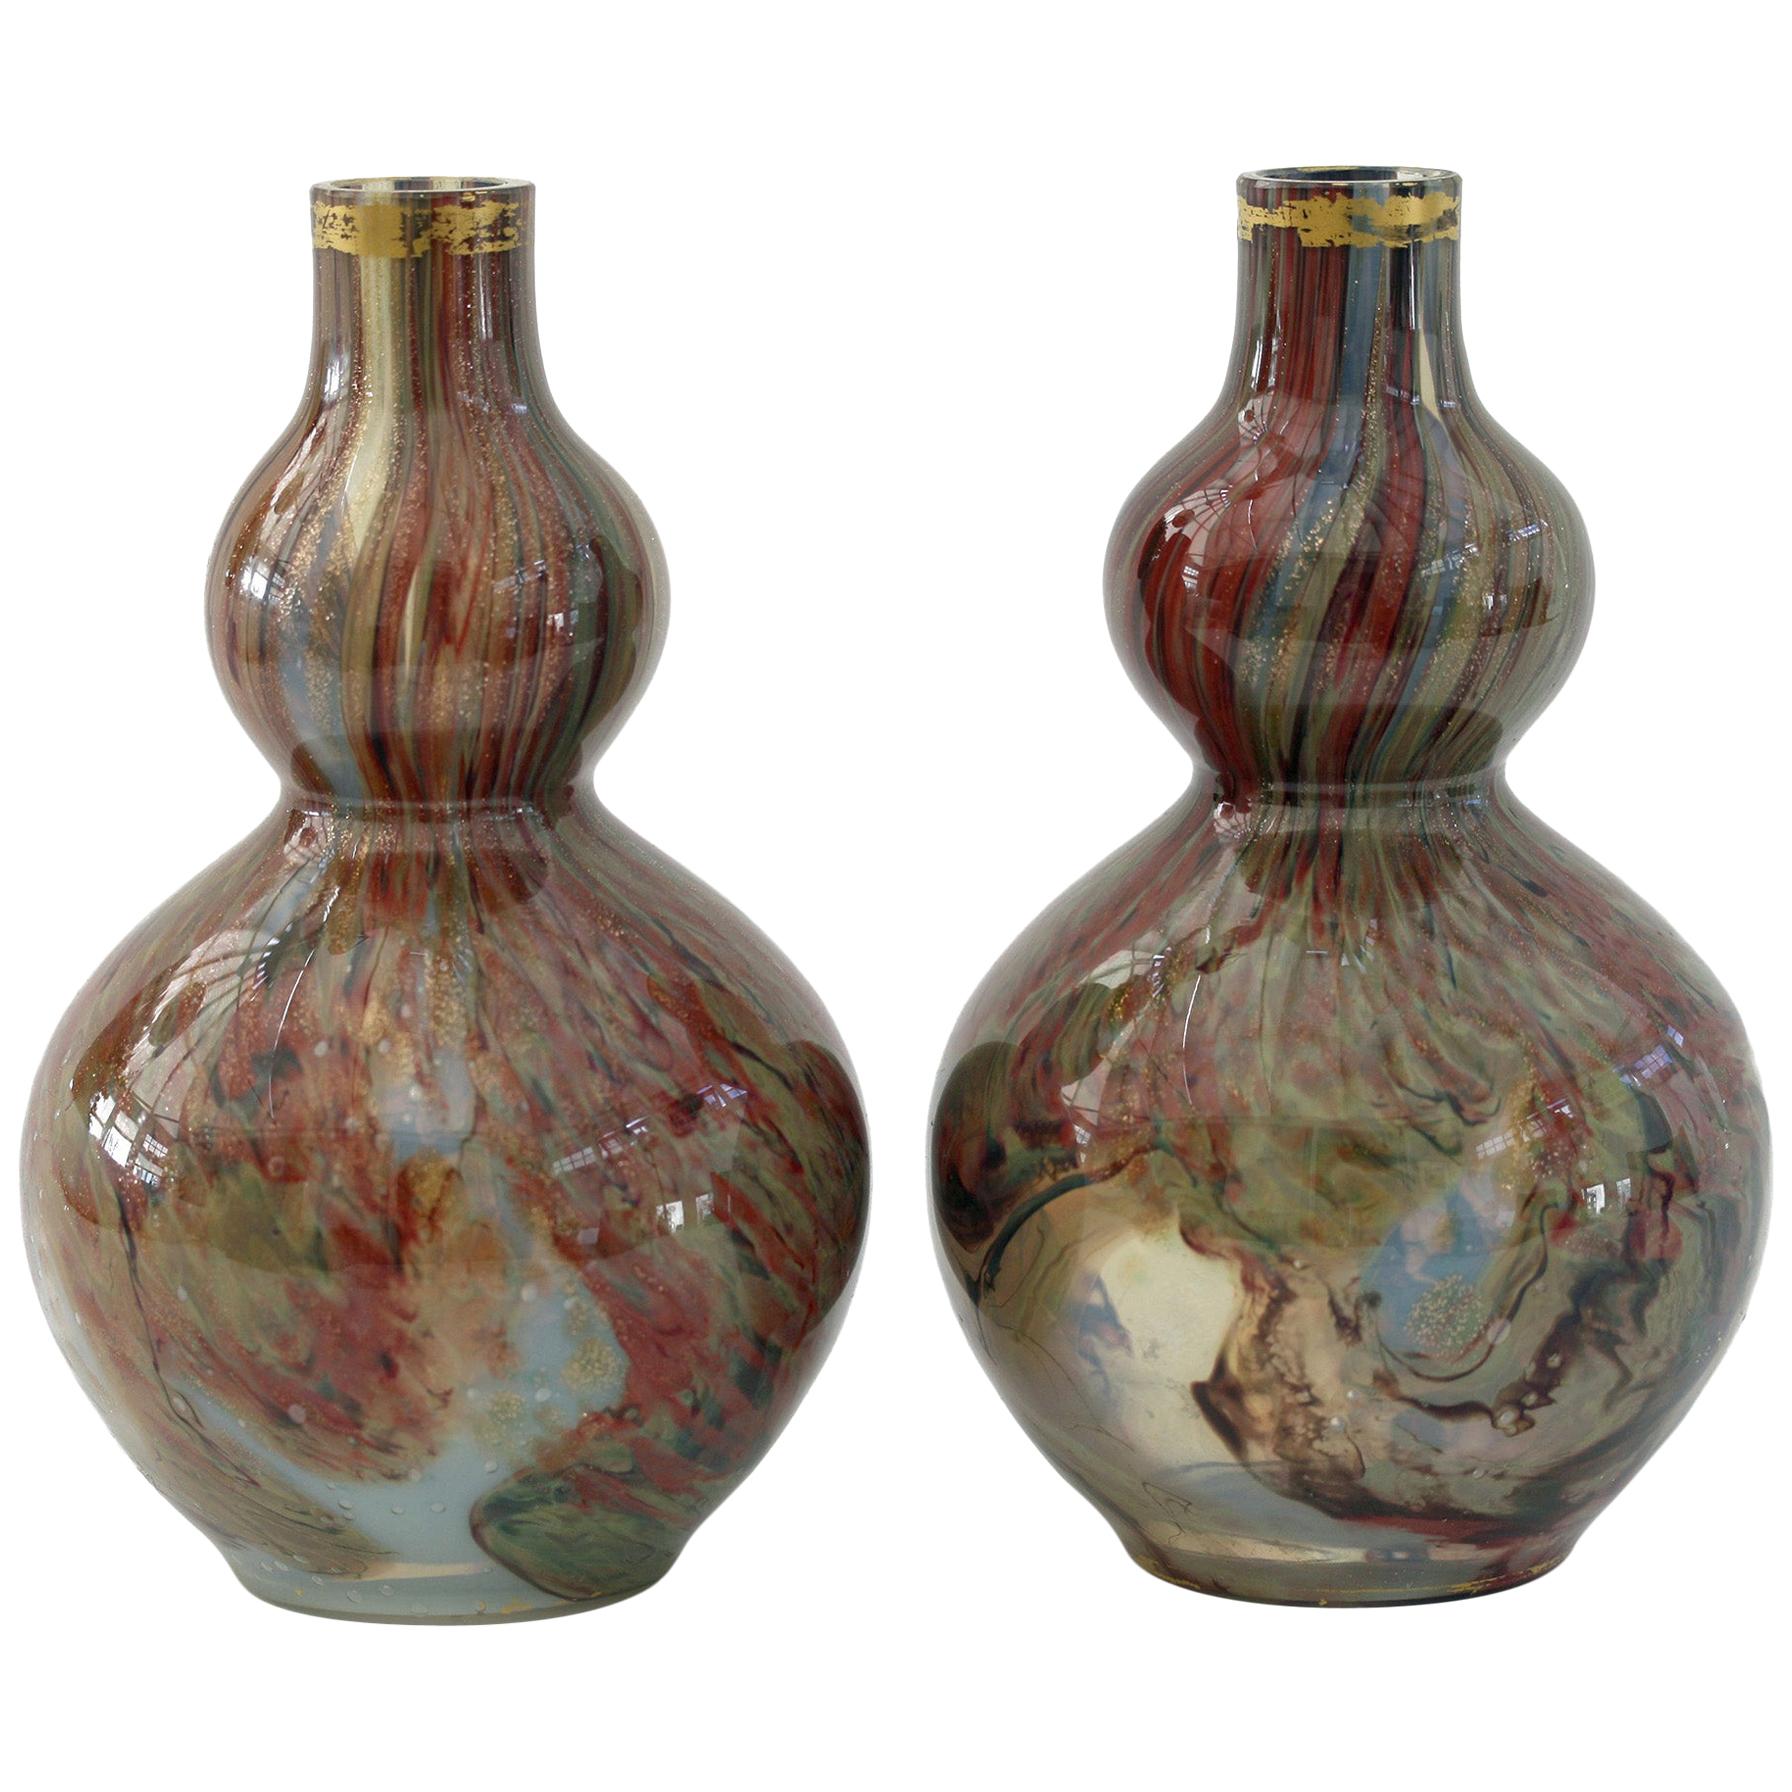 French Attributed Unusual Pair of Double Gourd Art Glass Vases, 19th Century